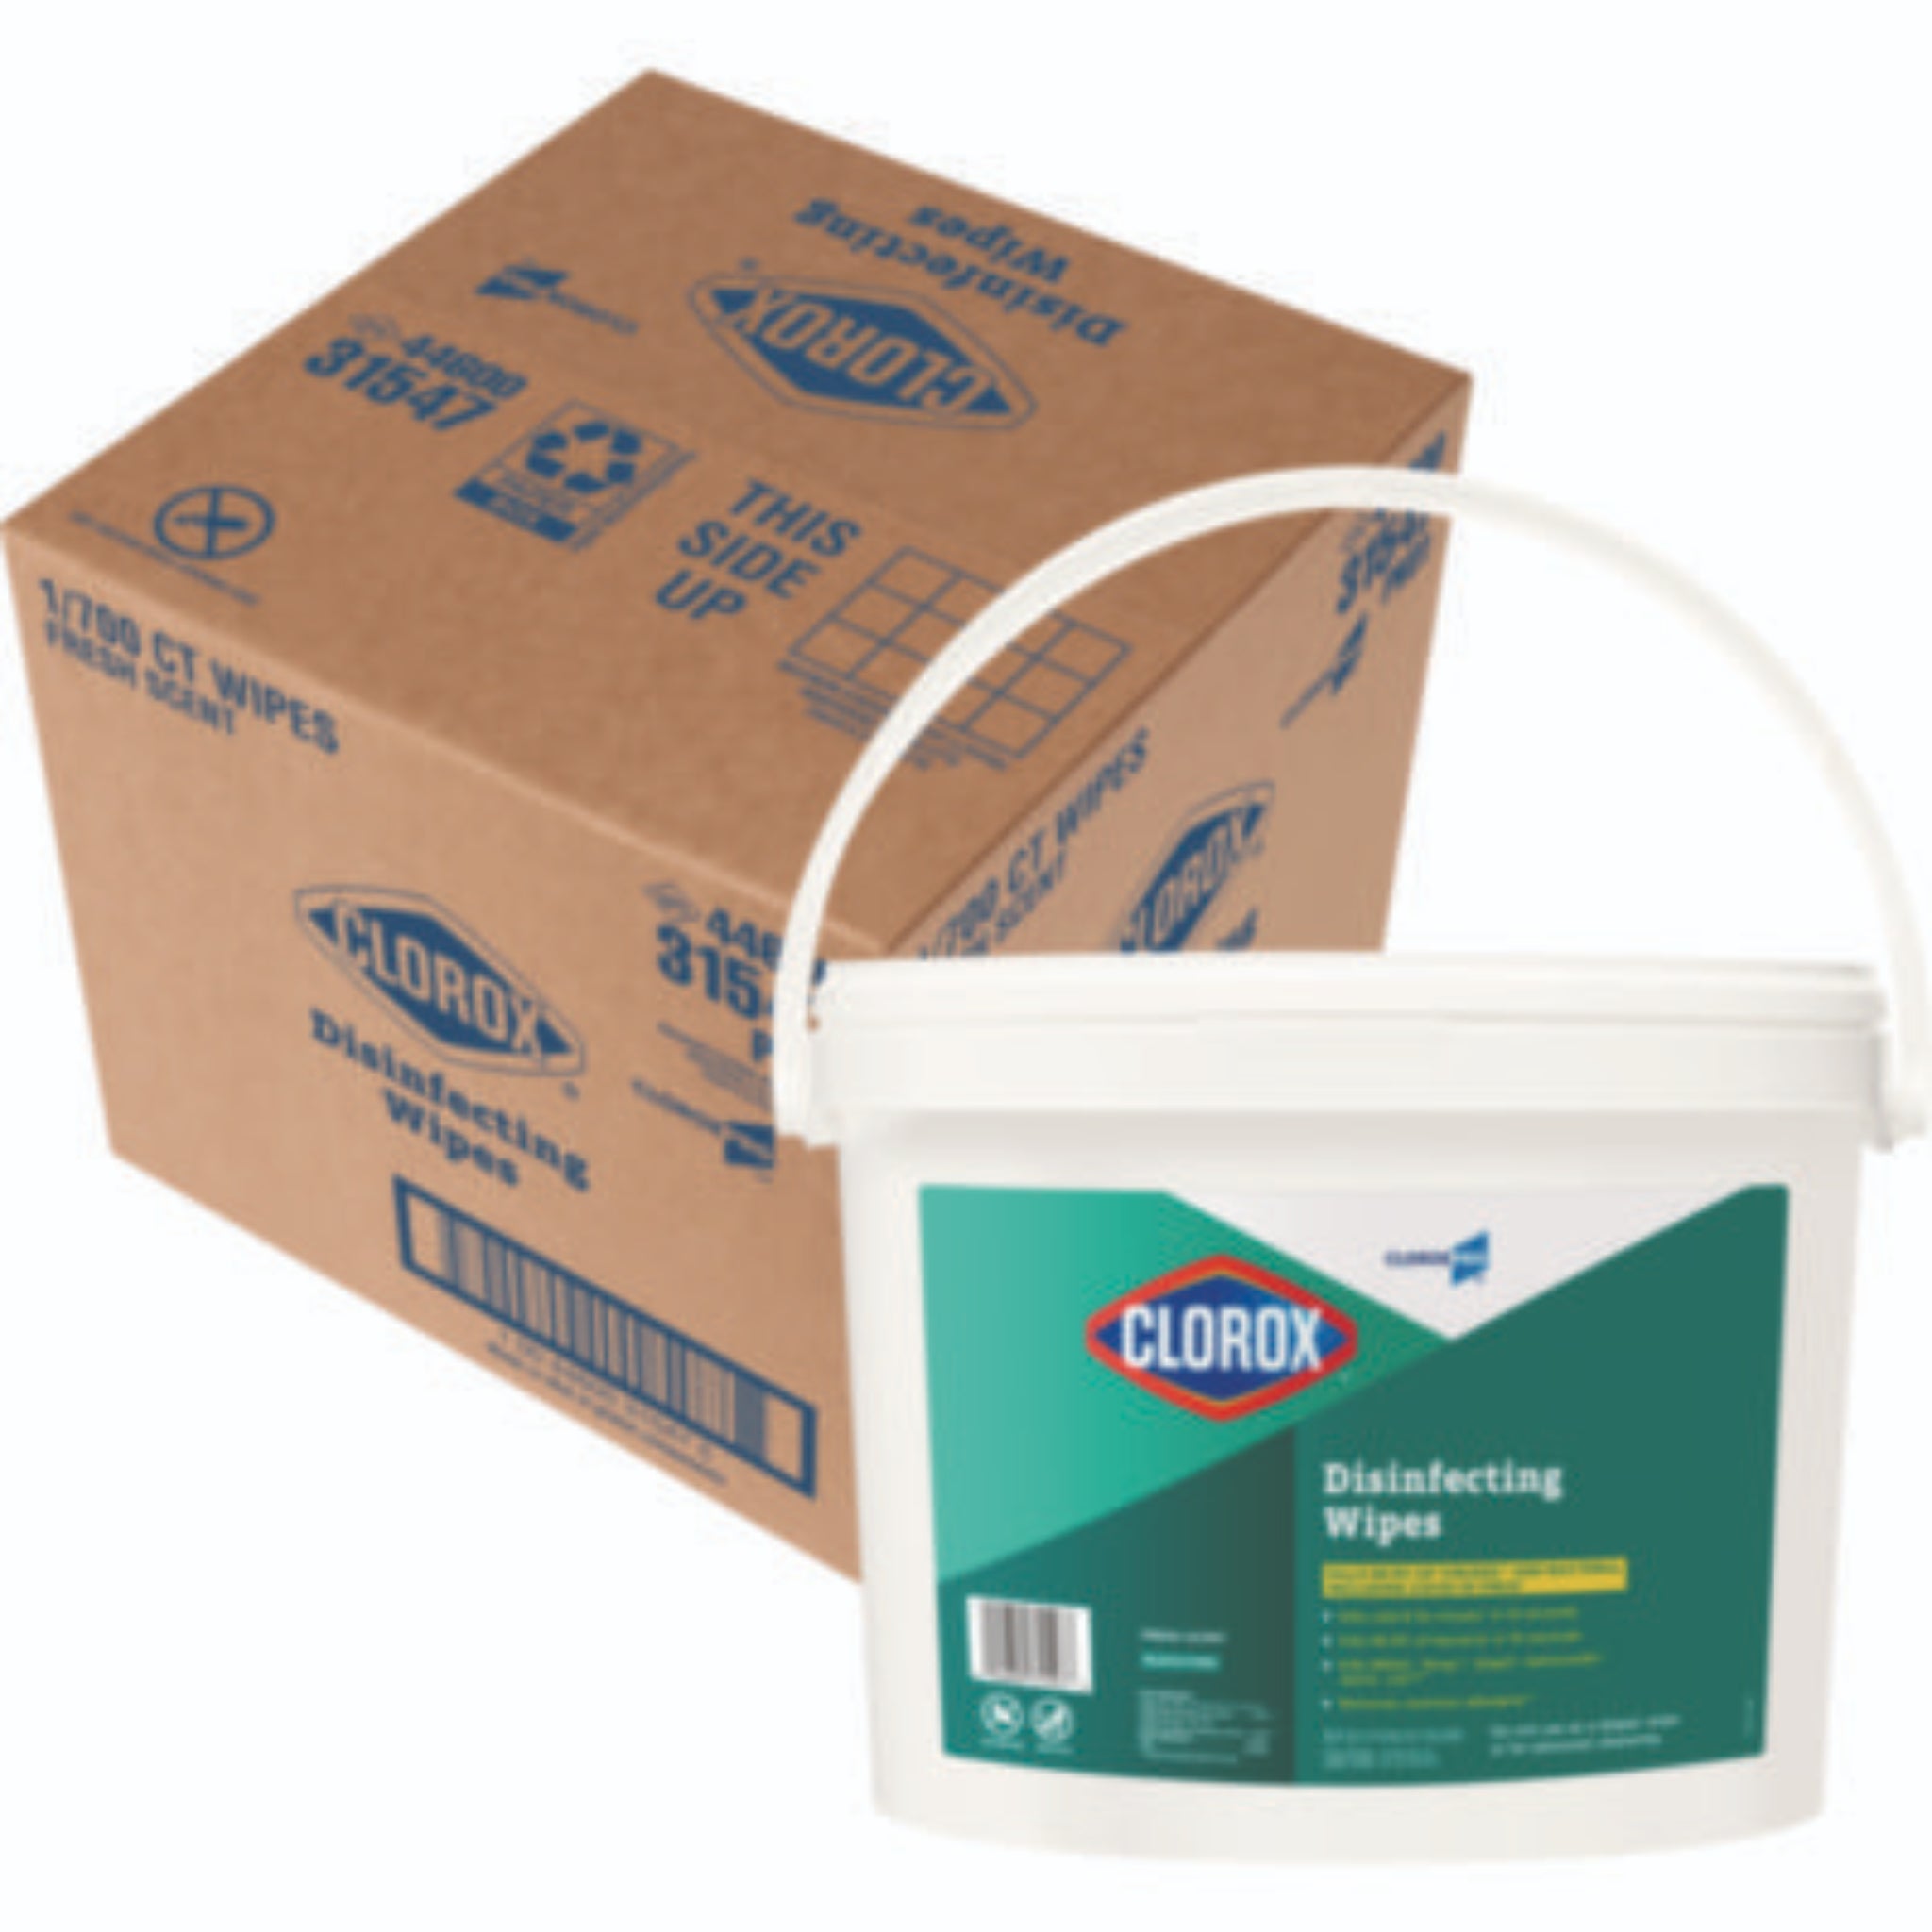 CLOROX SALES CO. CLO31547 Disinfecting Wipes, 1-Ply, 7 x 8, Fresh Scent, White, 700/Bucket, Carton of 1